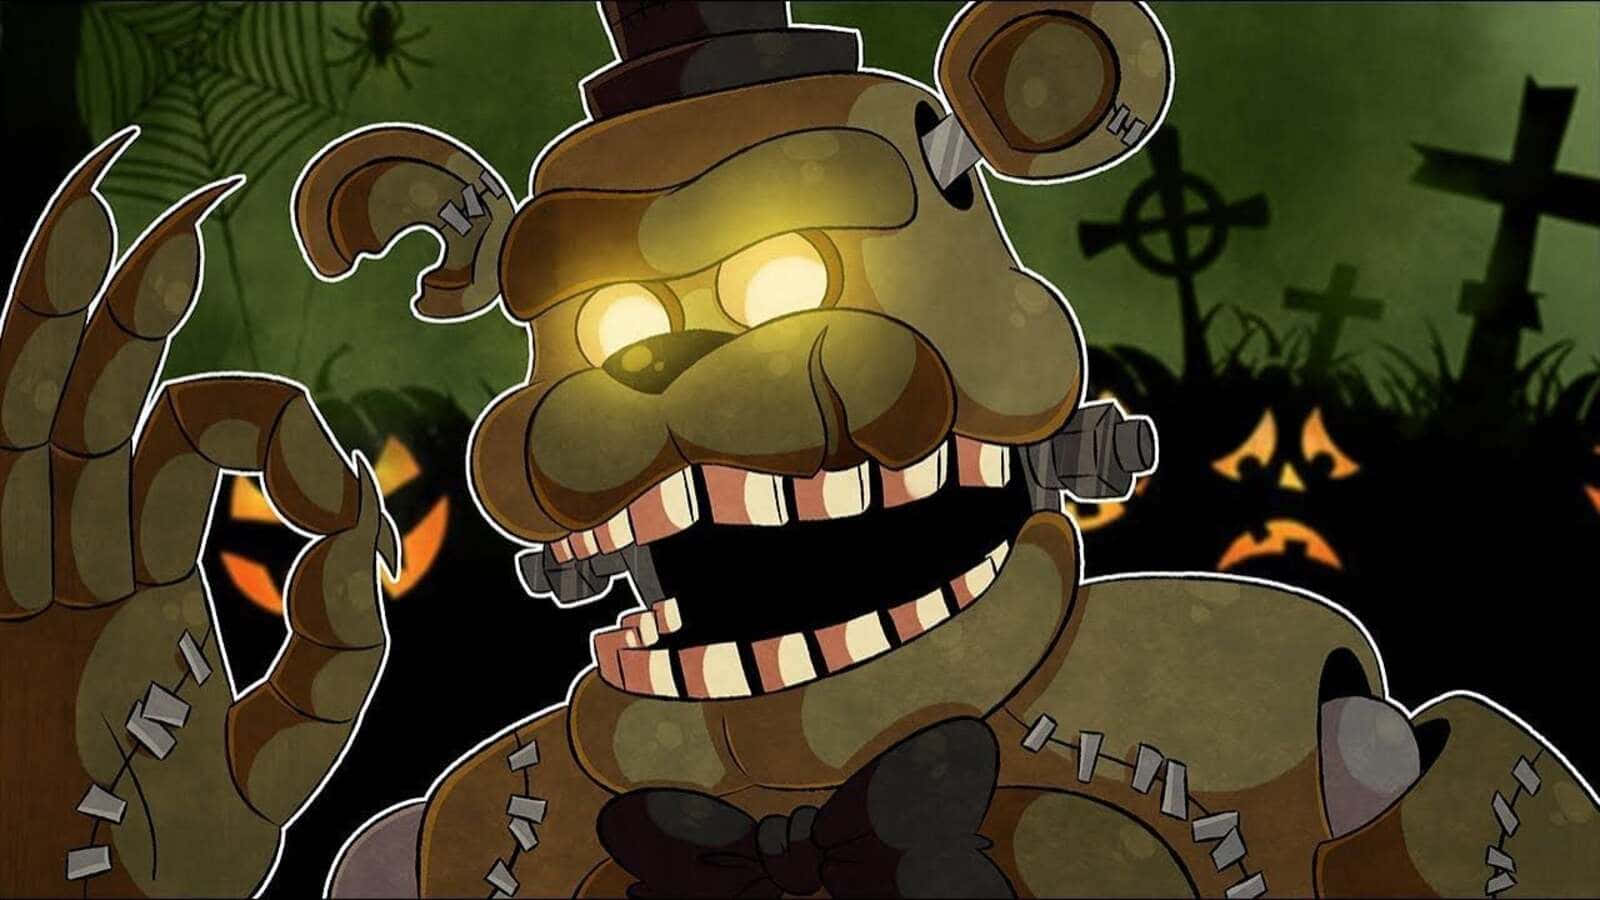 FNaF Dreadful Art Wallpapers - Five Nights at Freddy's Wallpapers